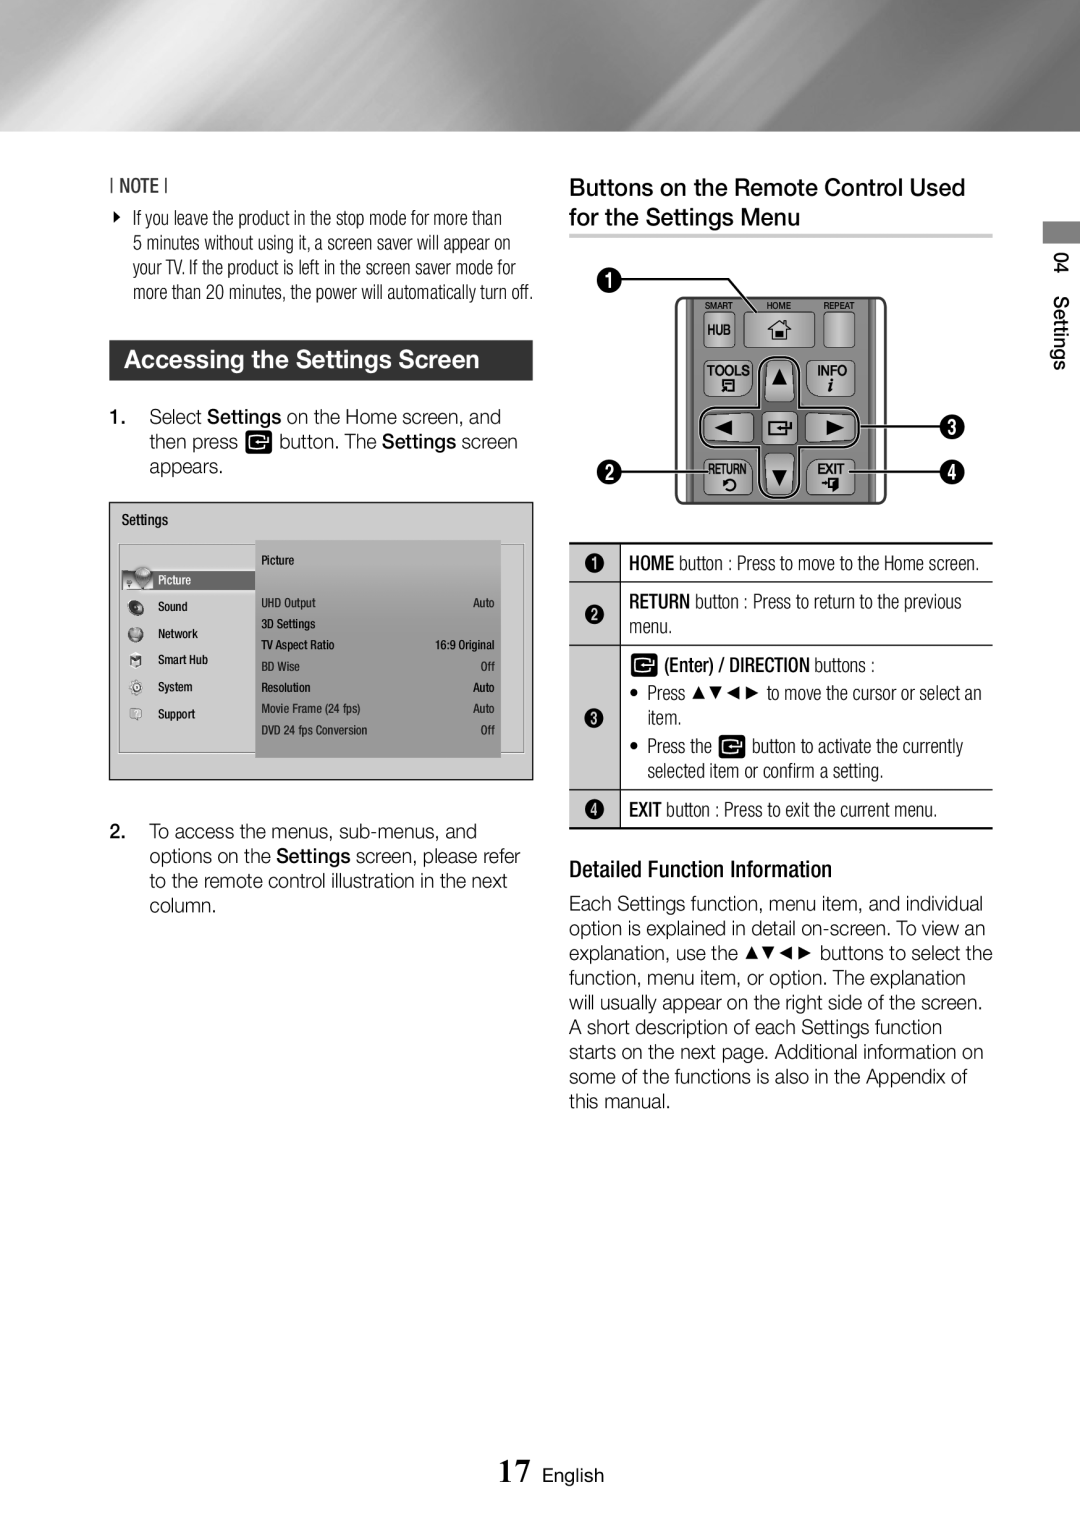 Samsung BD-J7500/ZF manual Accessing the Settings Screen, Buttons on the Remote Control Used for the Settings Menu, English 